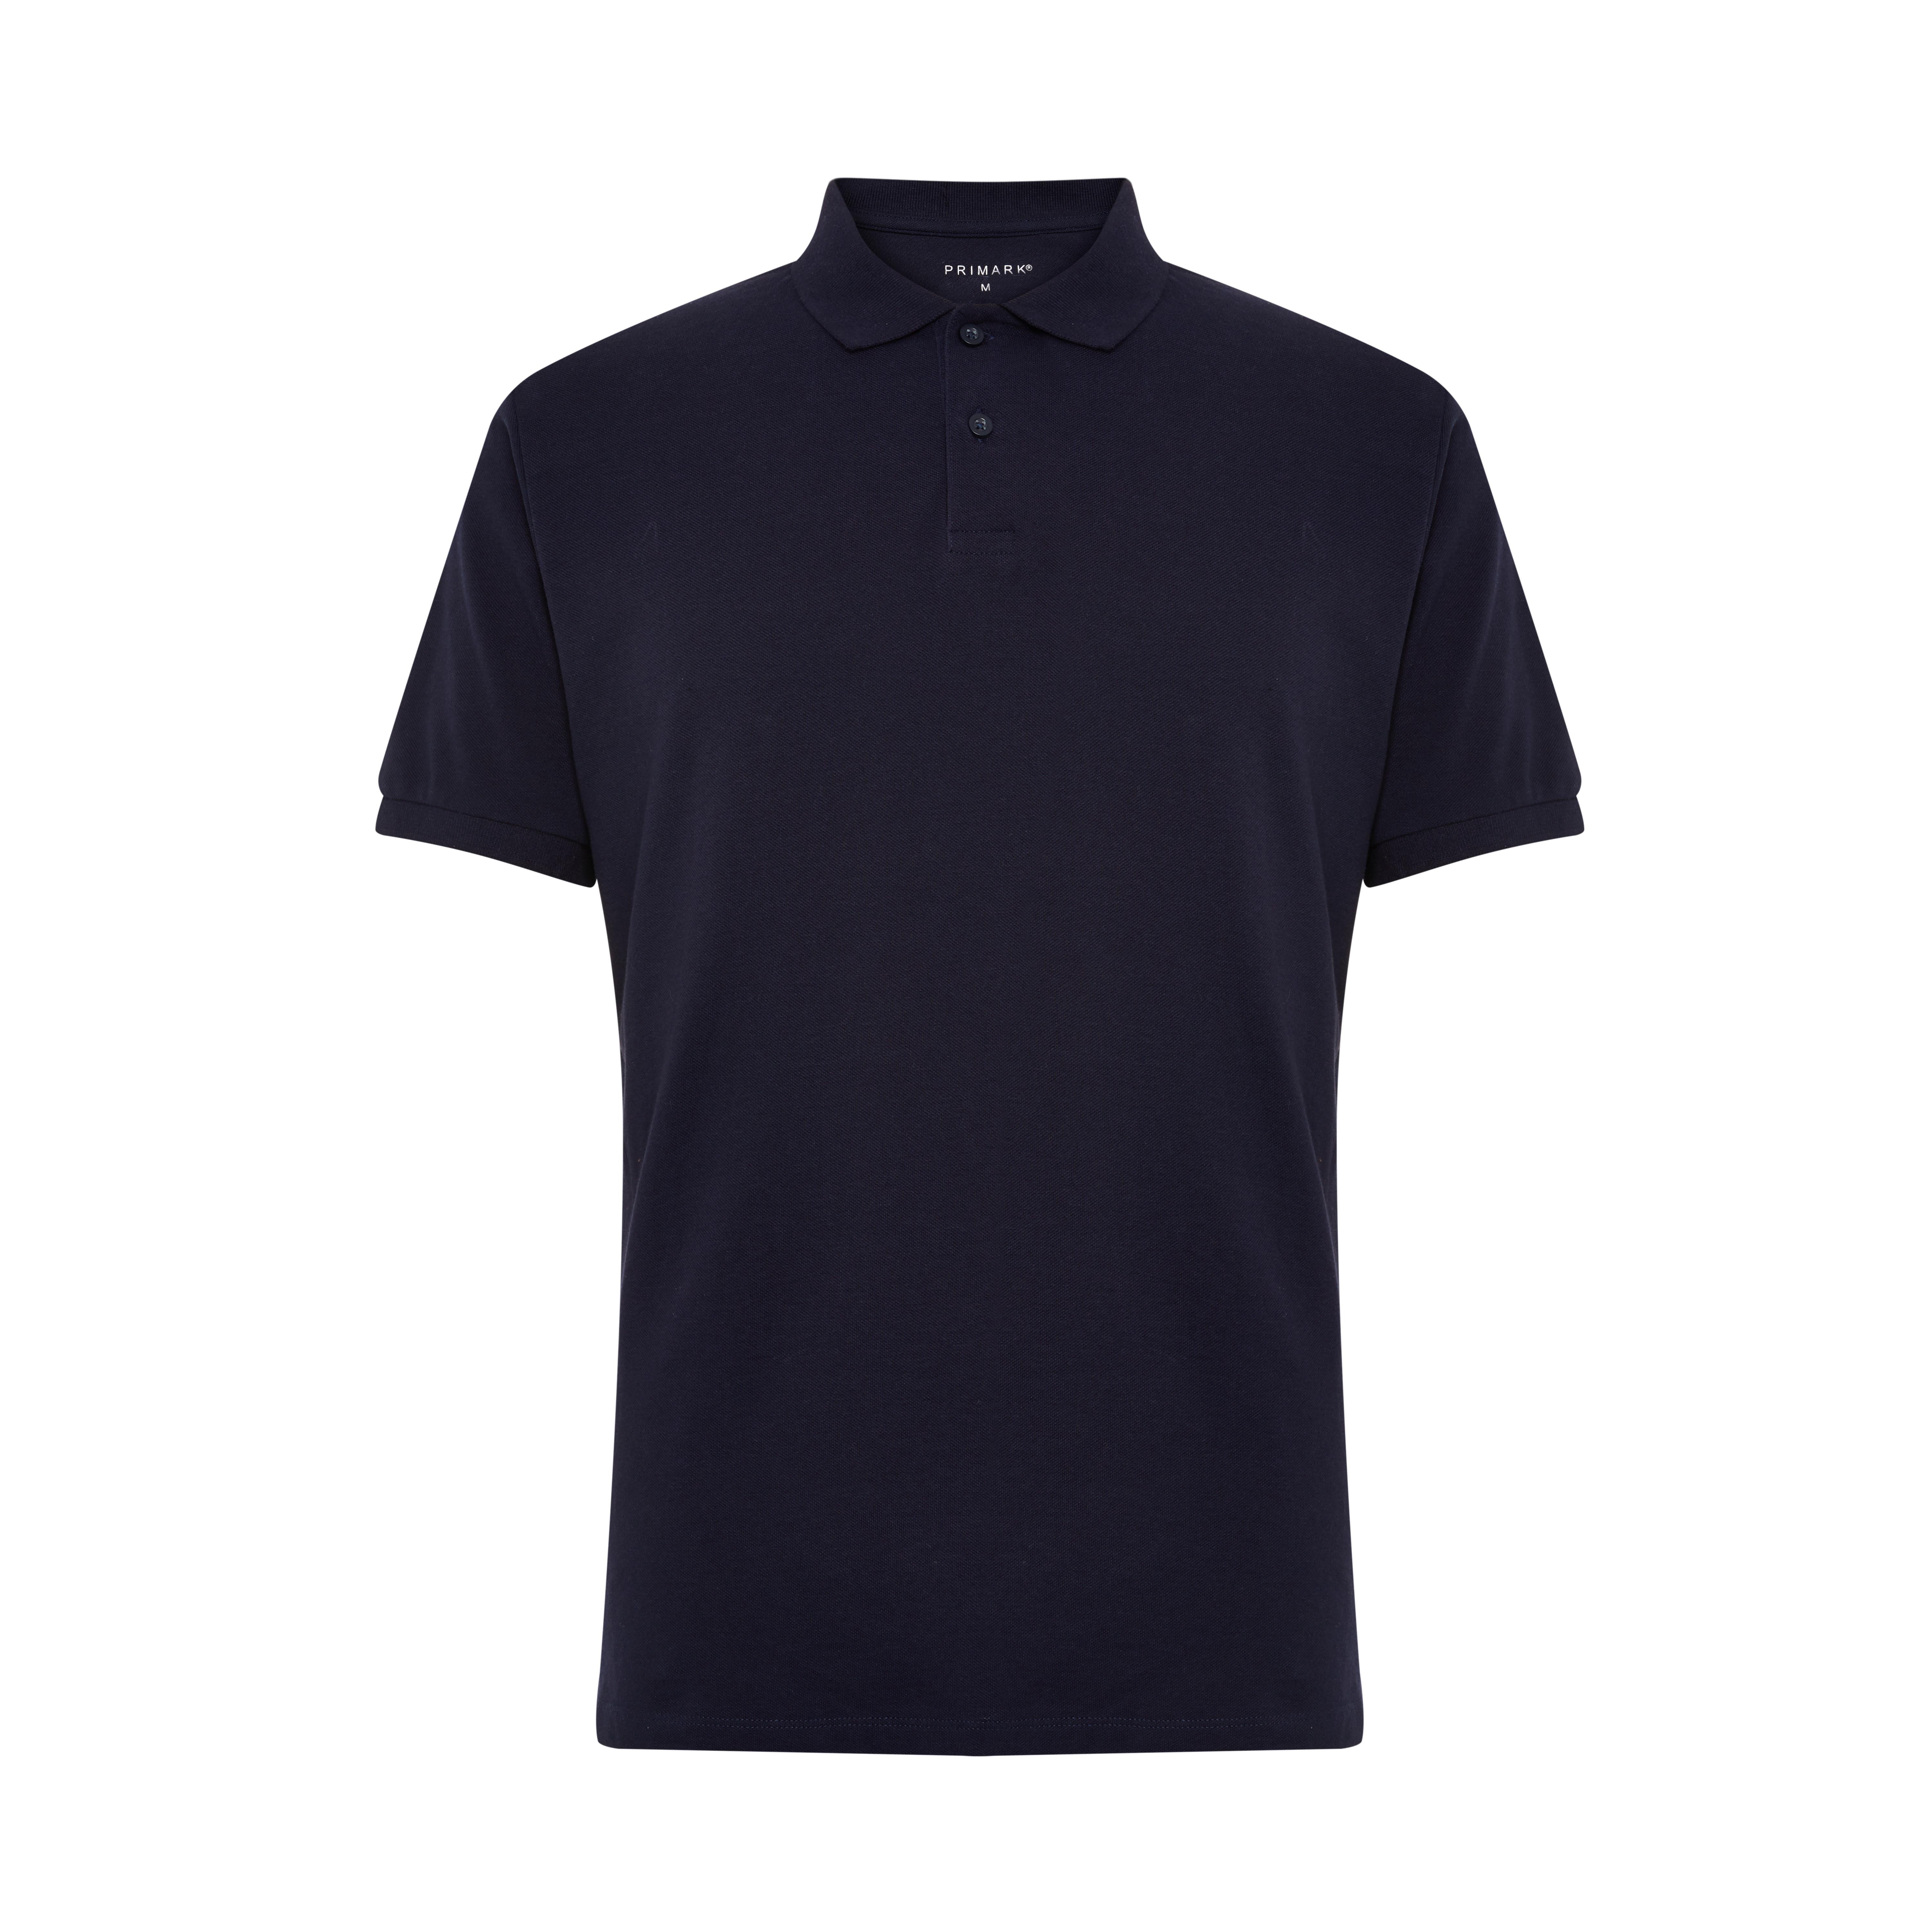 constant uitgehongerd Spuug uit Navy Basic Piqué Polo | Men's Polo Shirts | Men's T-shirts &amp; Tops |  Men's Style | Our Menswear Collections | All Primark Products | Primark